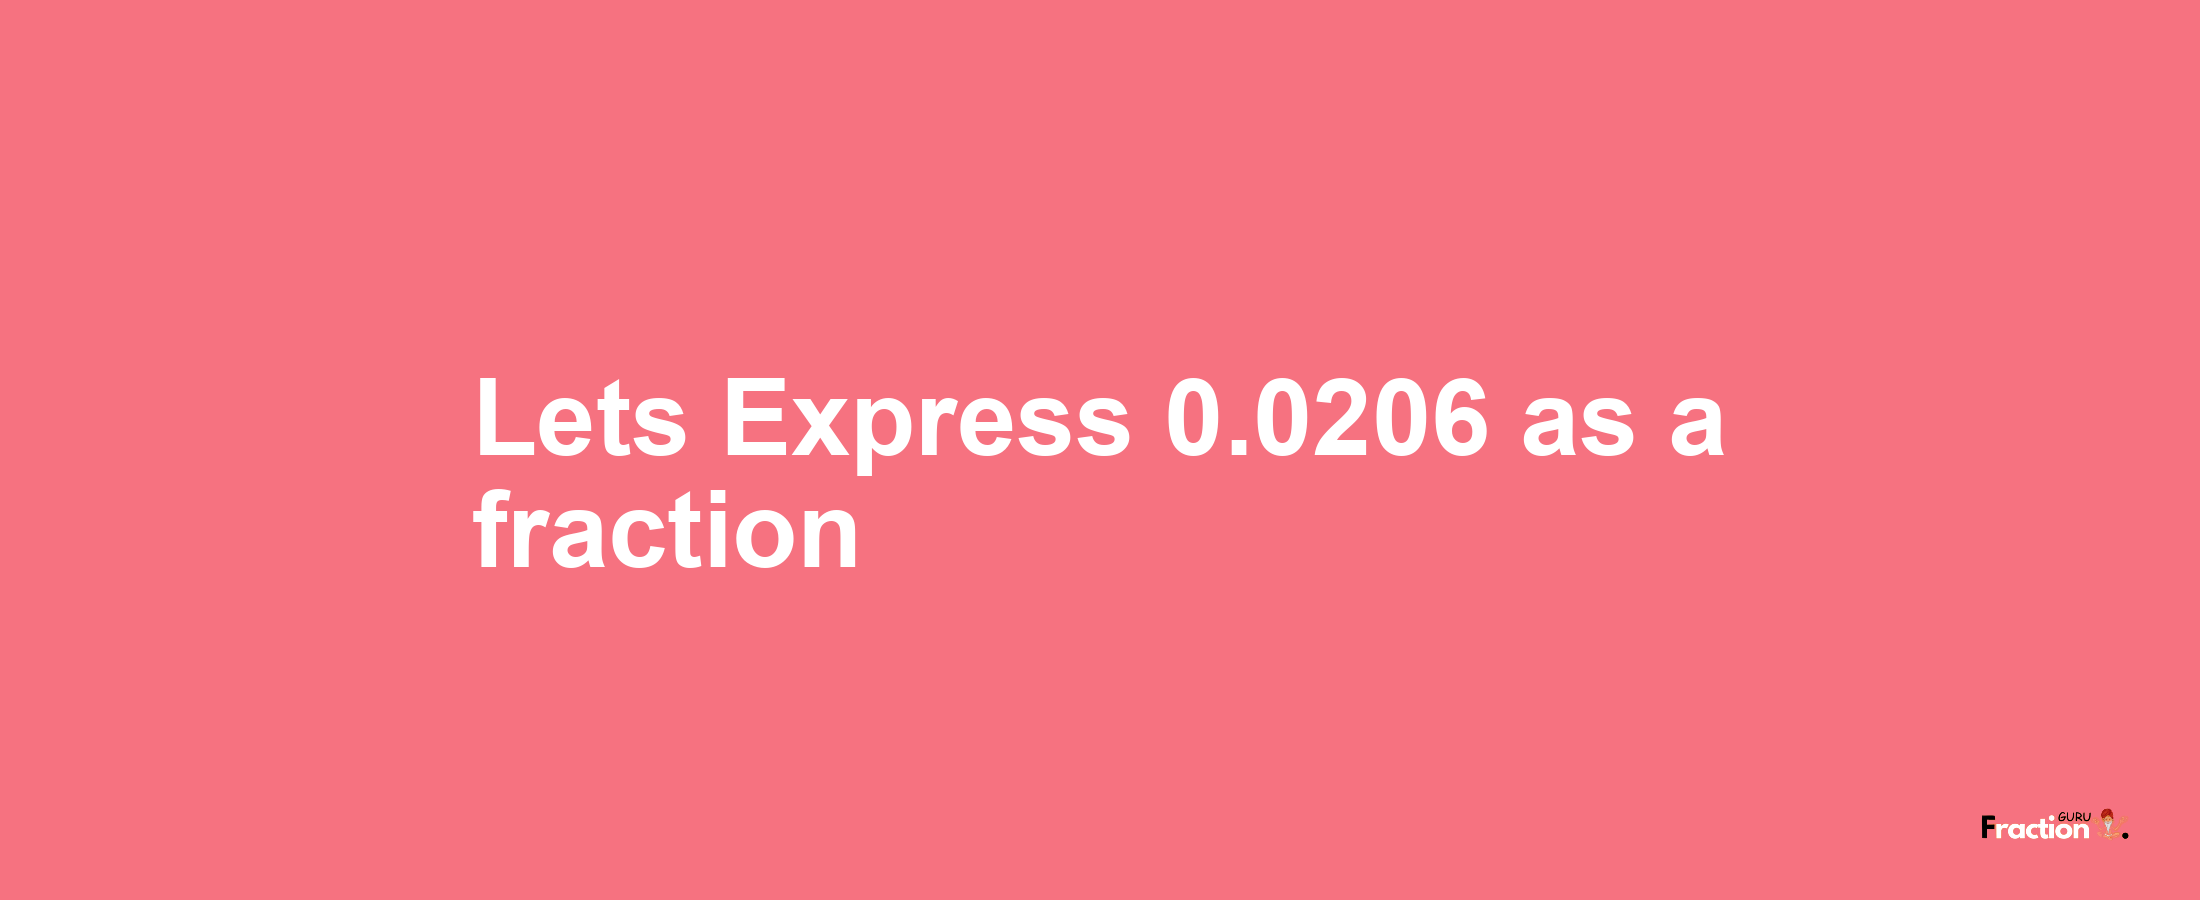 Lets Express 0.0206 as afraction